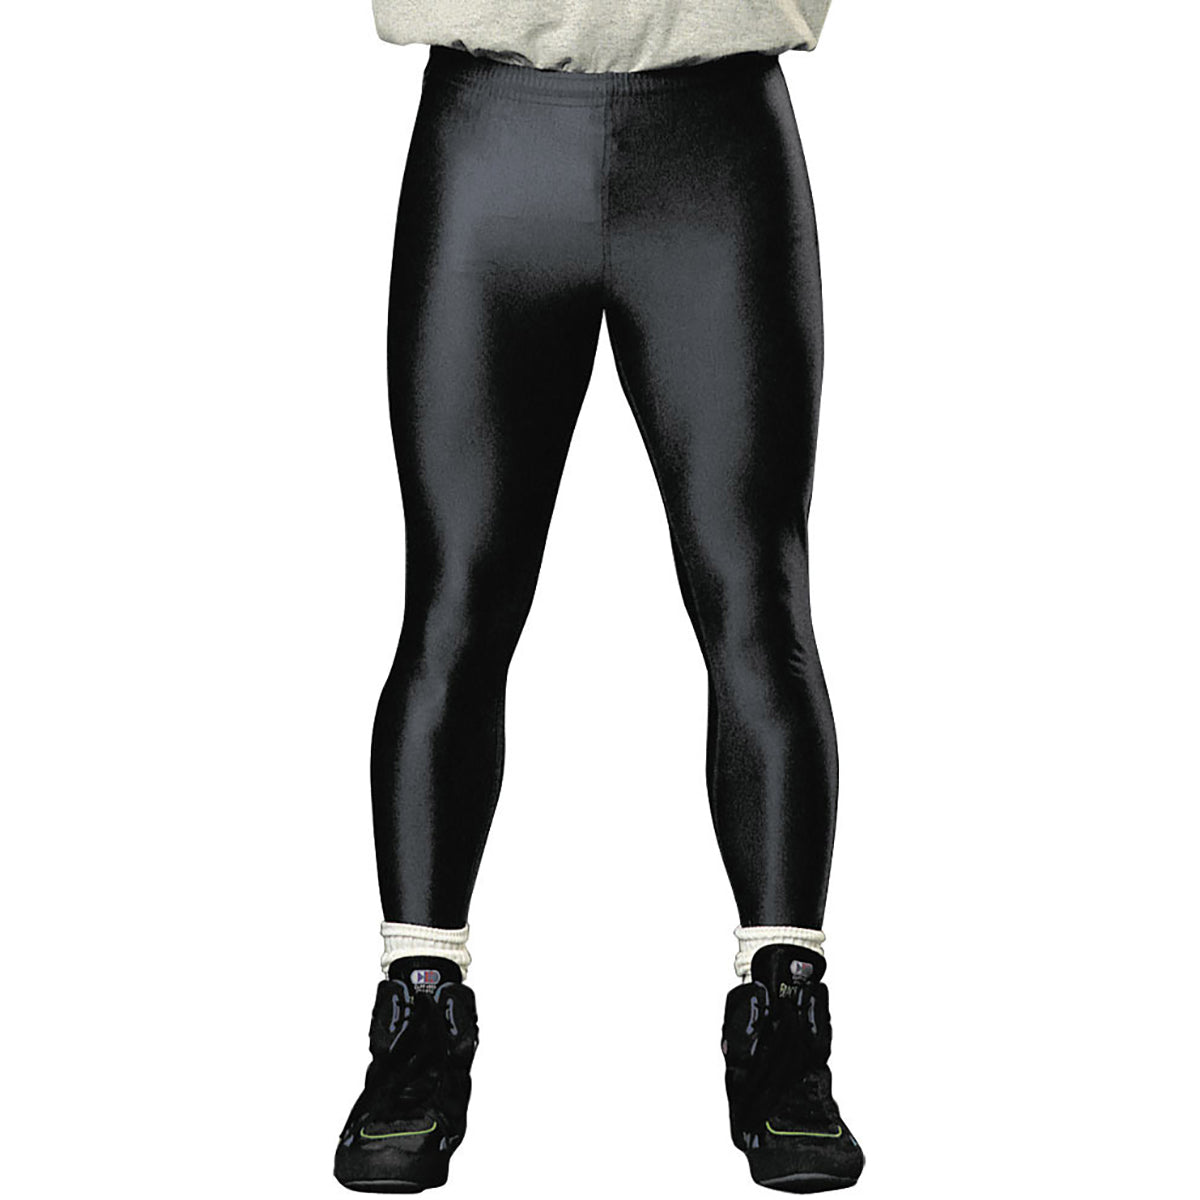 Cliff Keen The Force Compression Gear Wrestling Tights - Black Cliff Keen